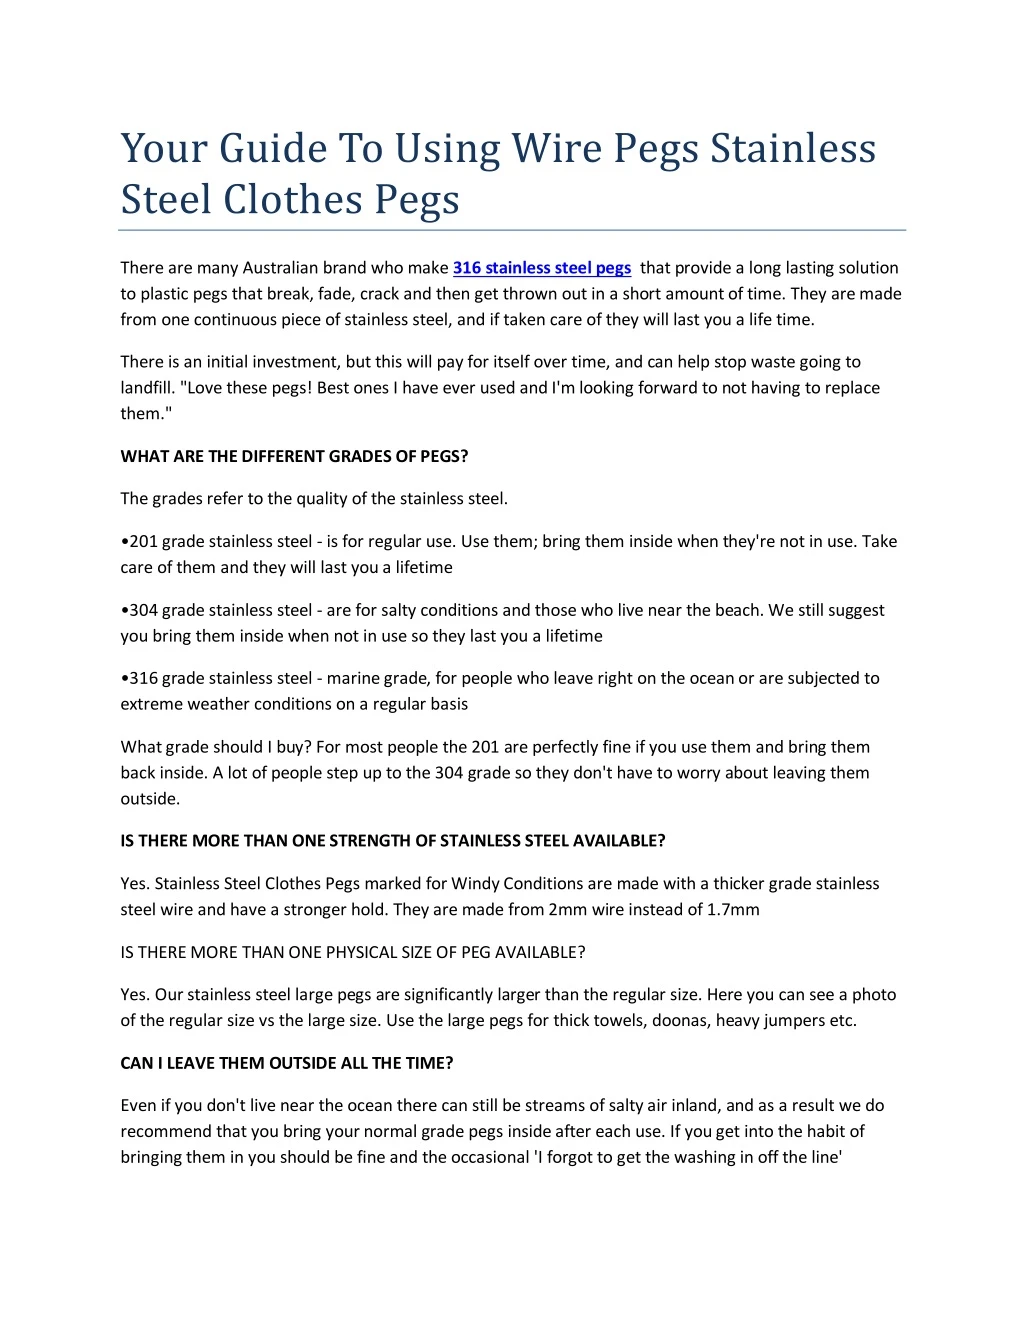 your guide to using wire pegs stainless steel